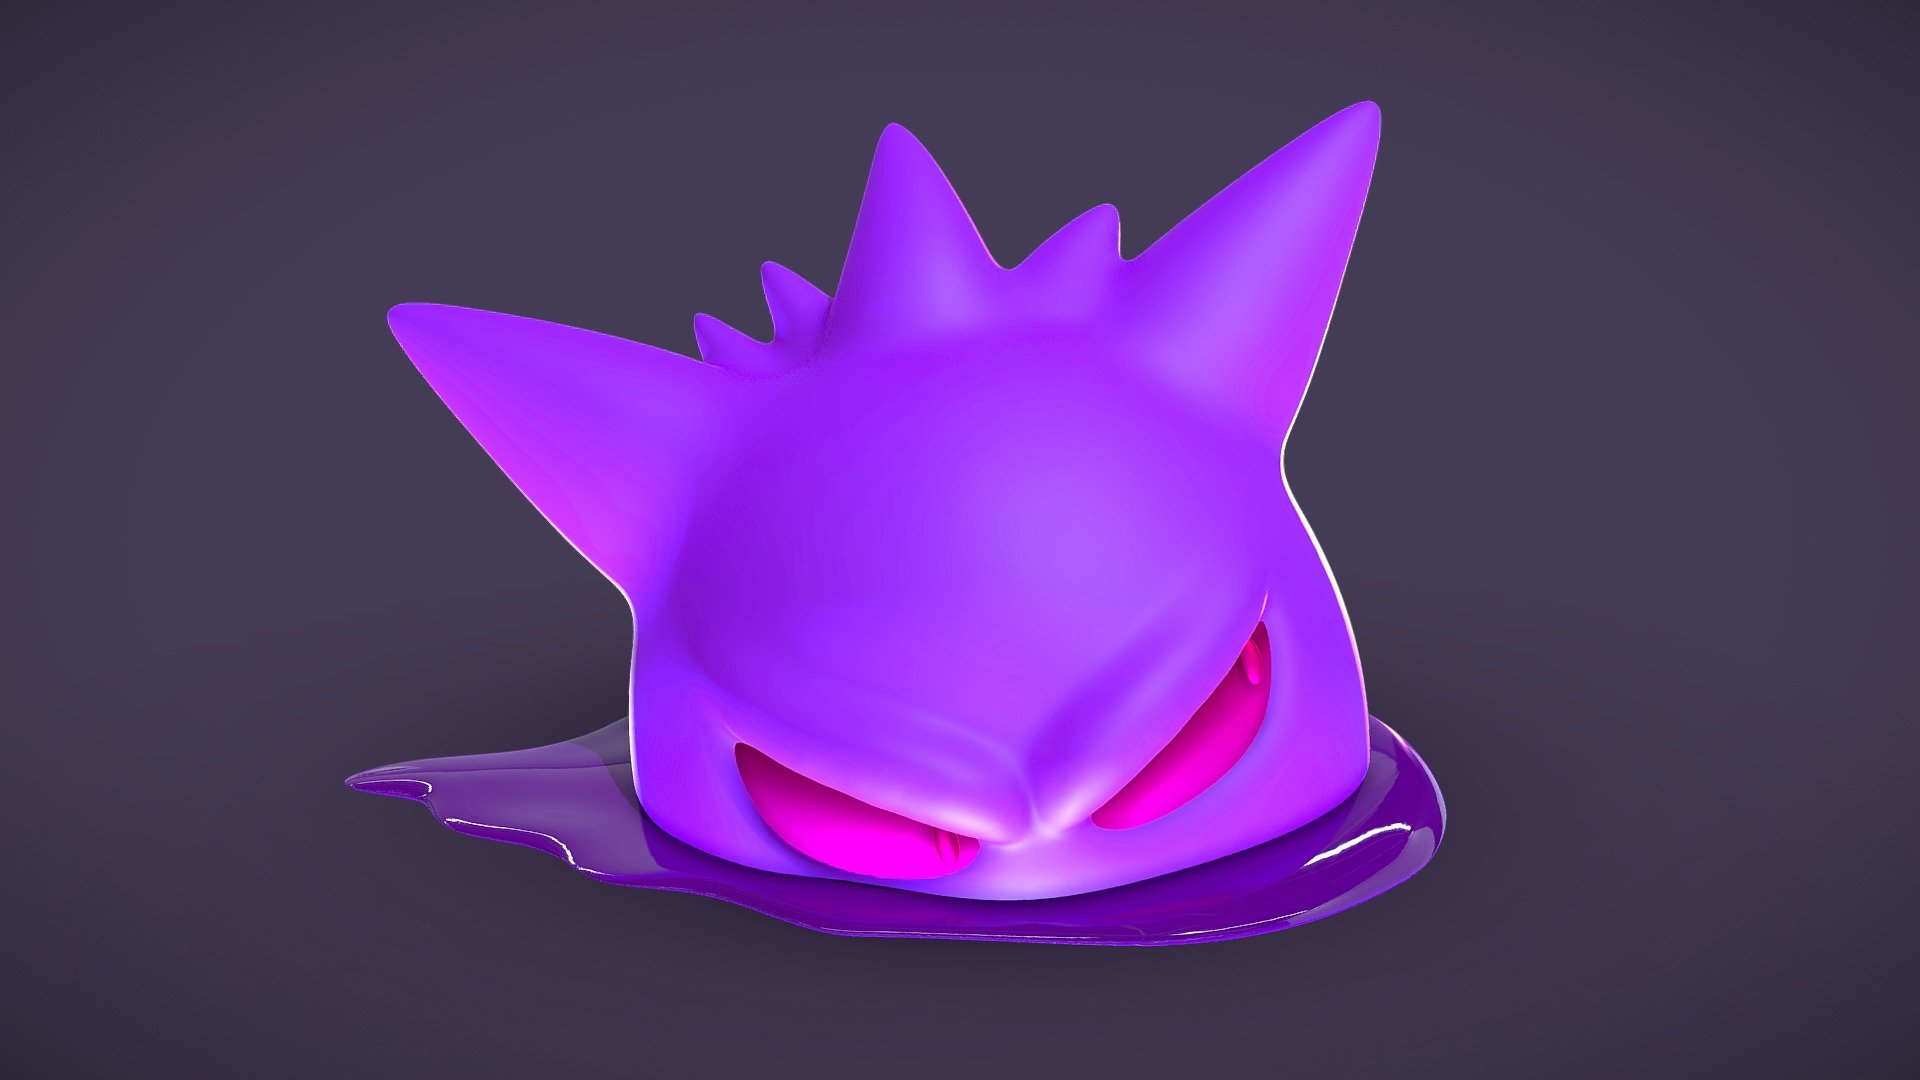 On the night of a full moon, if shadows move on their own and laugh, it must be Gengar’s doing.
Gengar loves spying.

Image Gallery

Files:




.Blend

.Fbx

.Stl
 - Gengar the spy - 3D print - Buy Royalty Free 3D model by LessaB3D 3d model